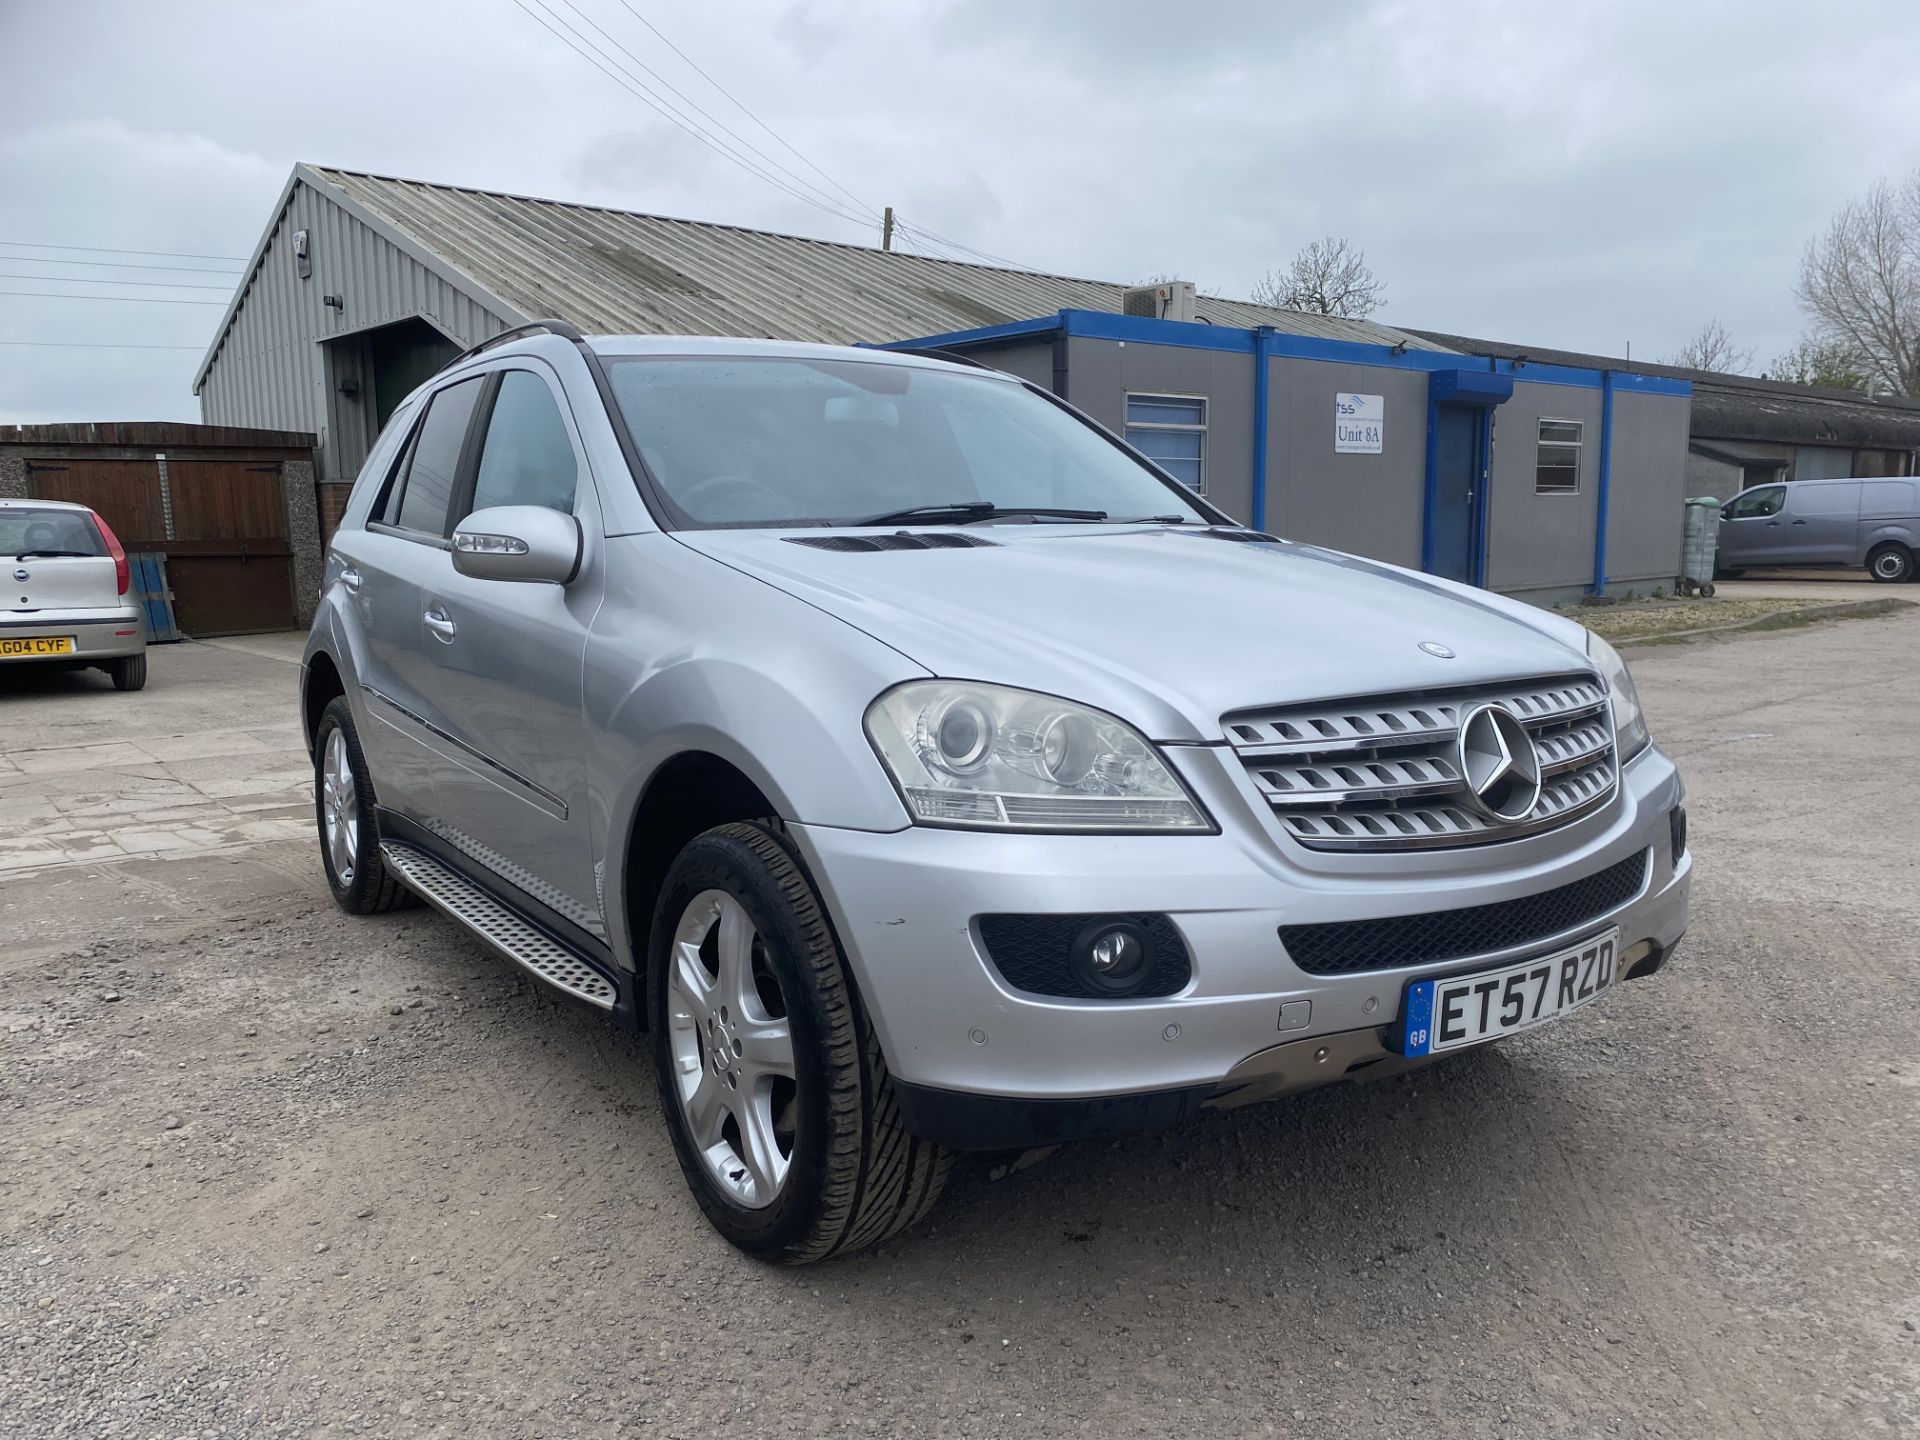 (Reserve Met) Mercedes ML280 Cdi (SPORT) Auto 3.0v6 Diesel - 2008 Reg - Only 94000 Miles Fsh Leather - Image 2 of 21